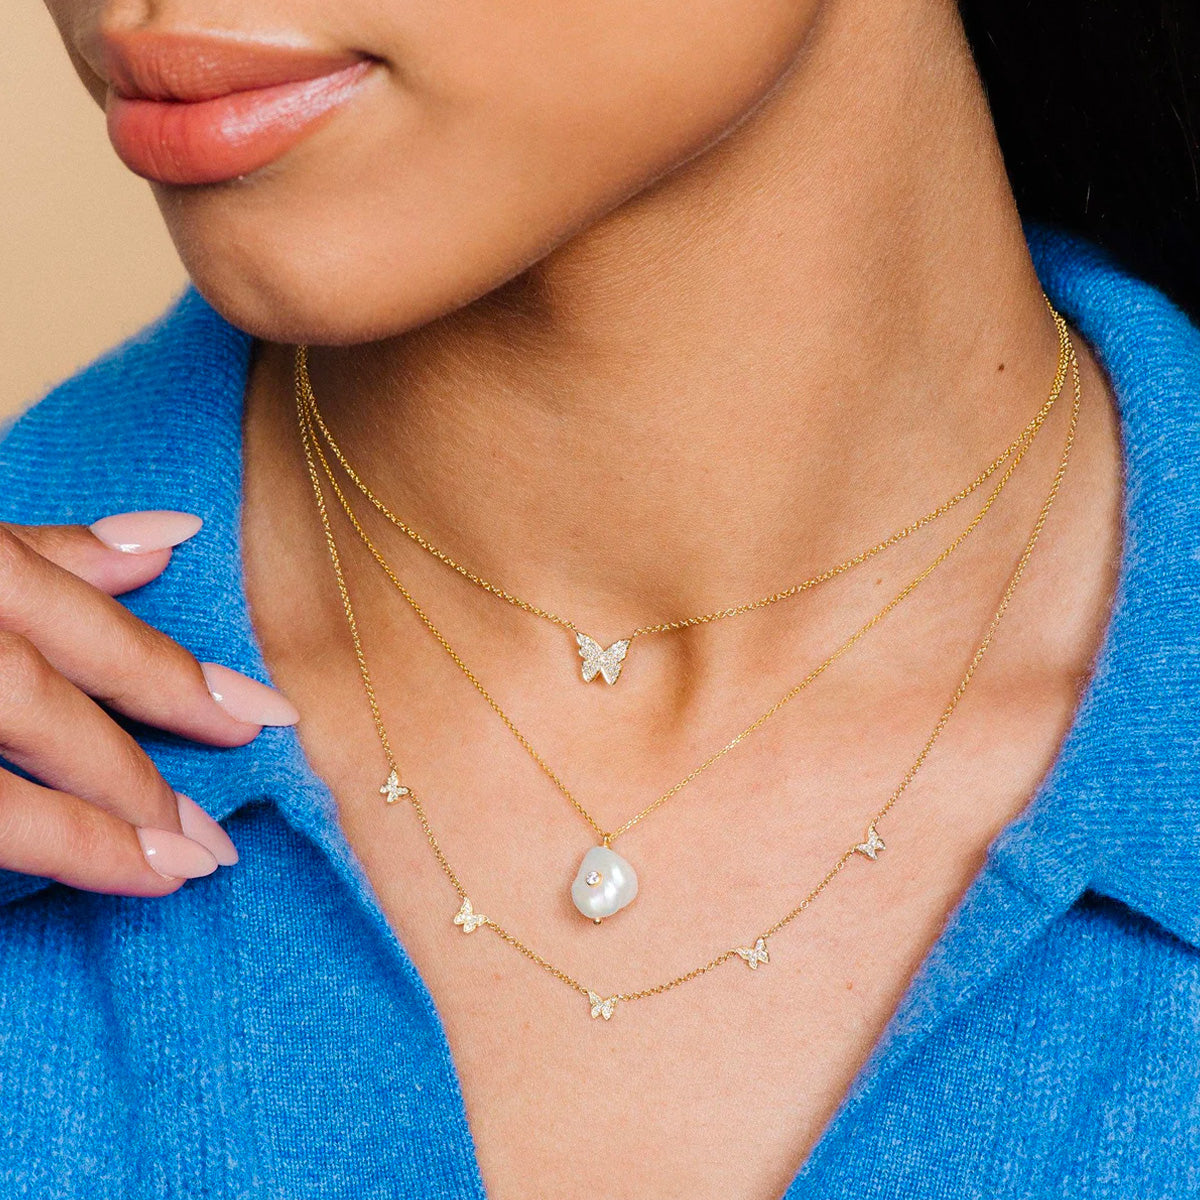 How to Keep Necklaces From Tangling – At Present